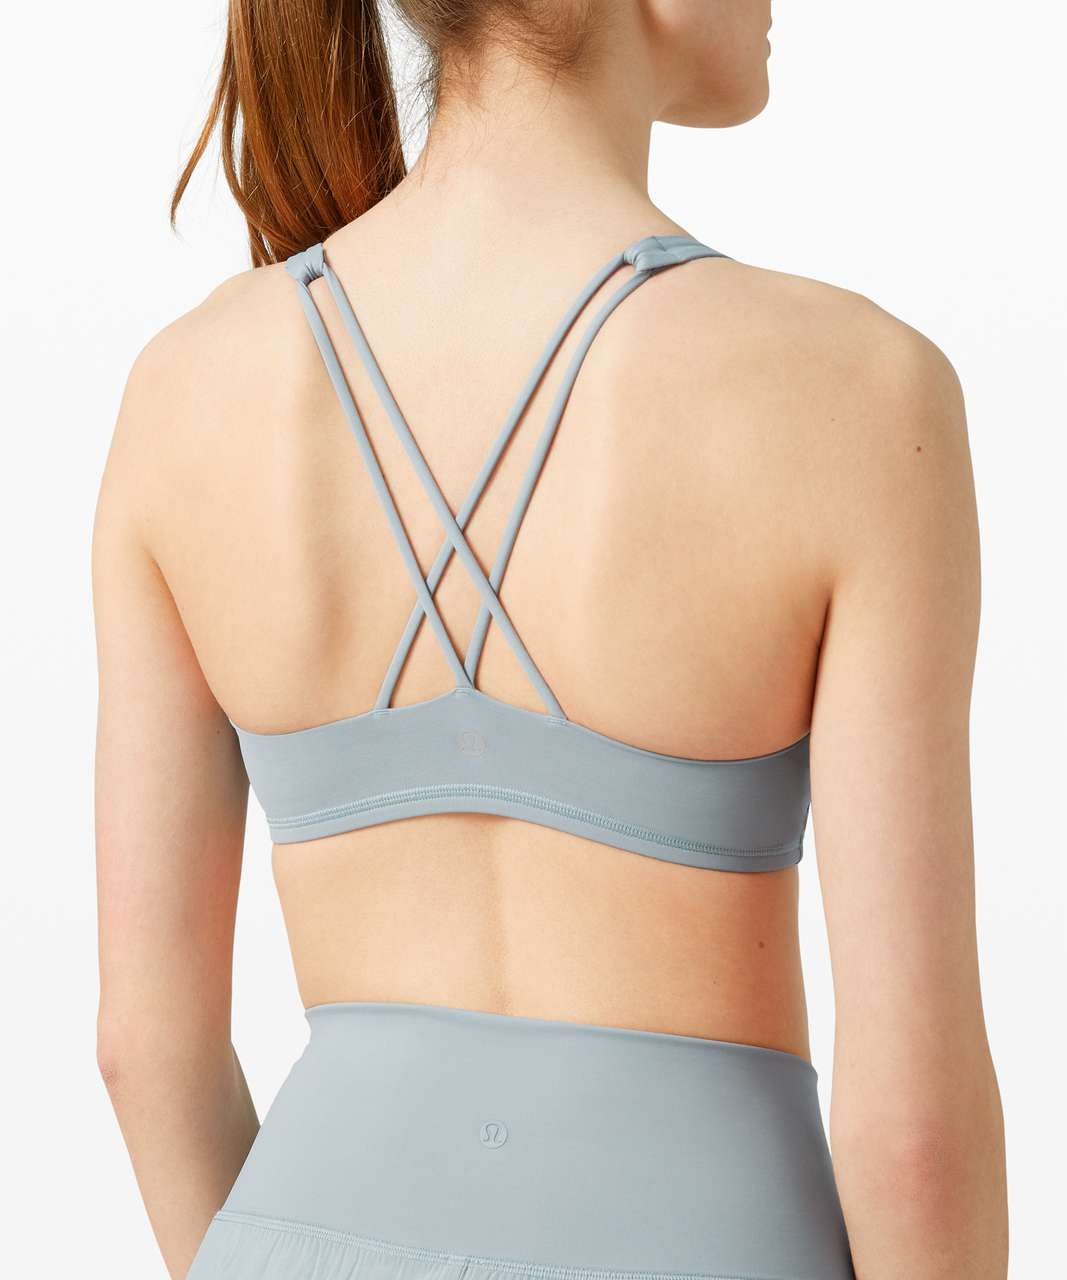 Lululemon Free To Be Bra *Light Support, A/B Cup (Online Only) - Blue Cast